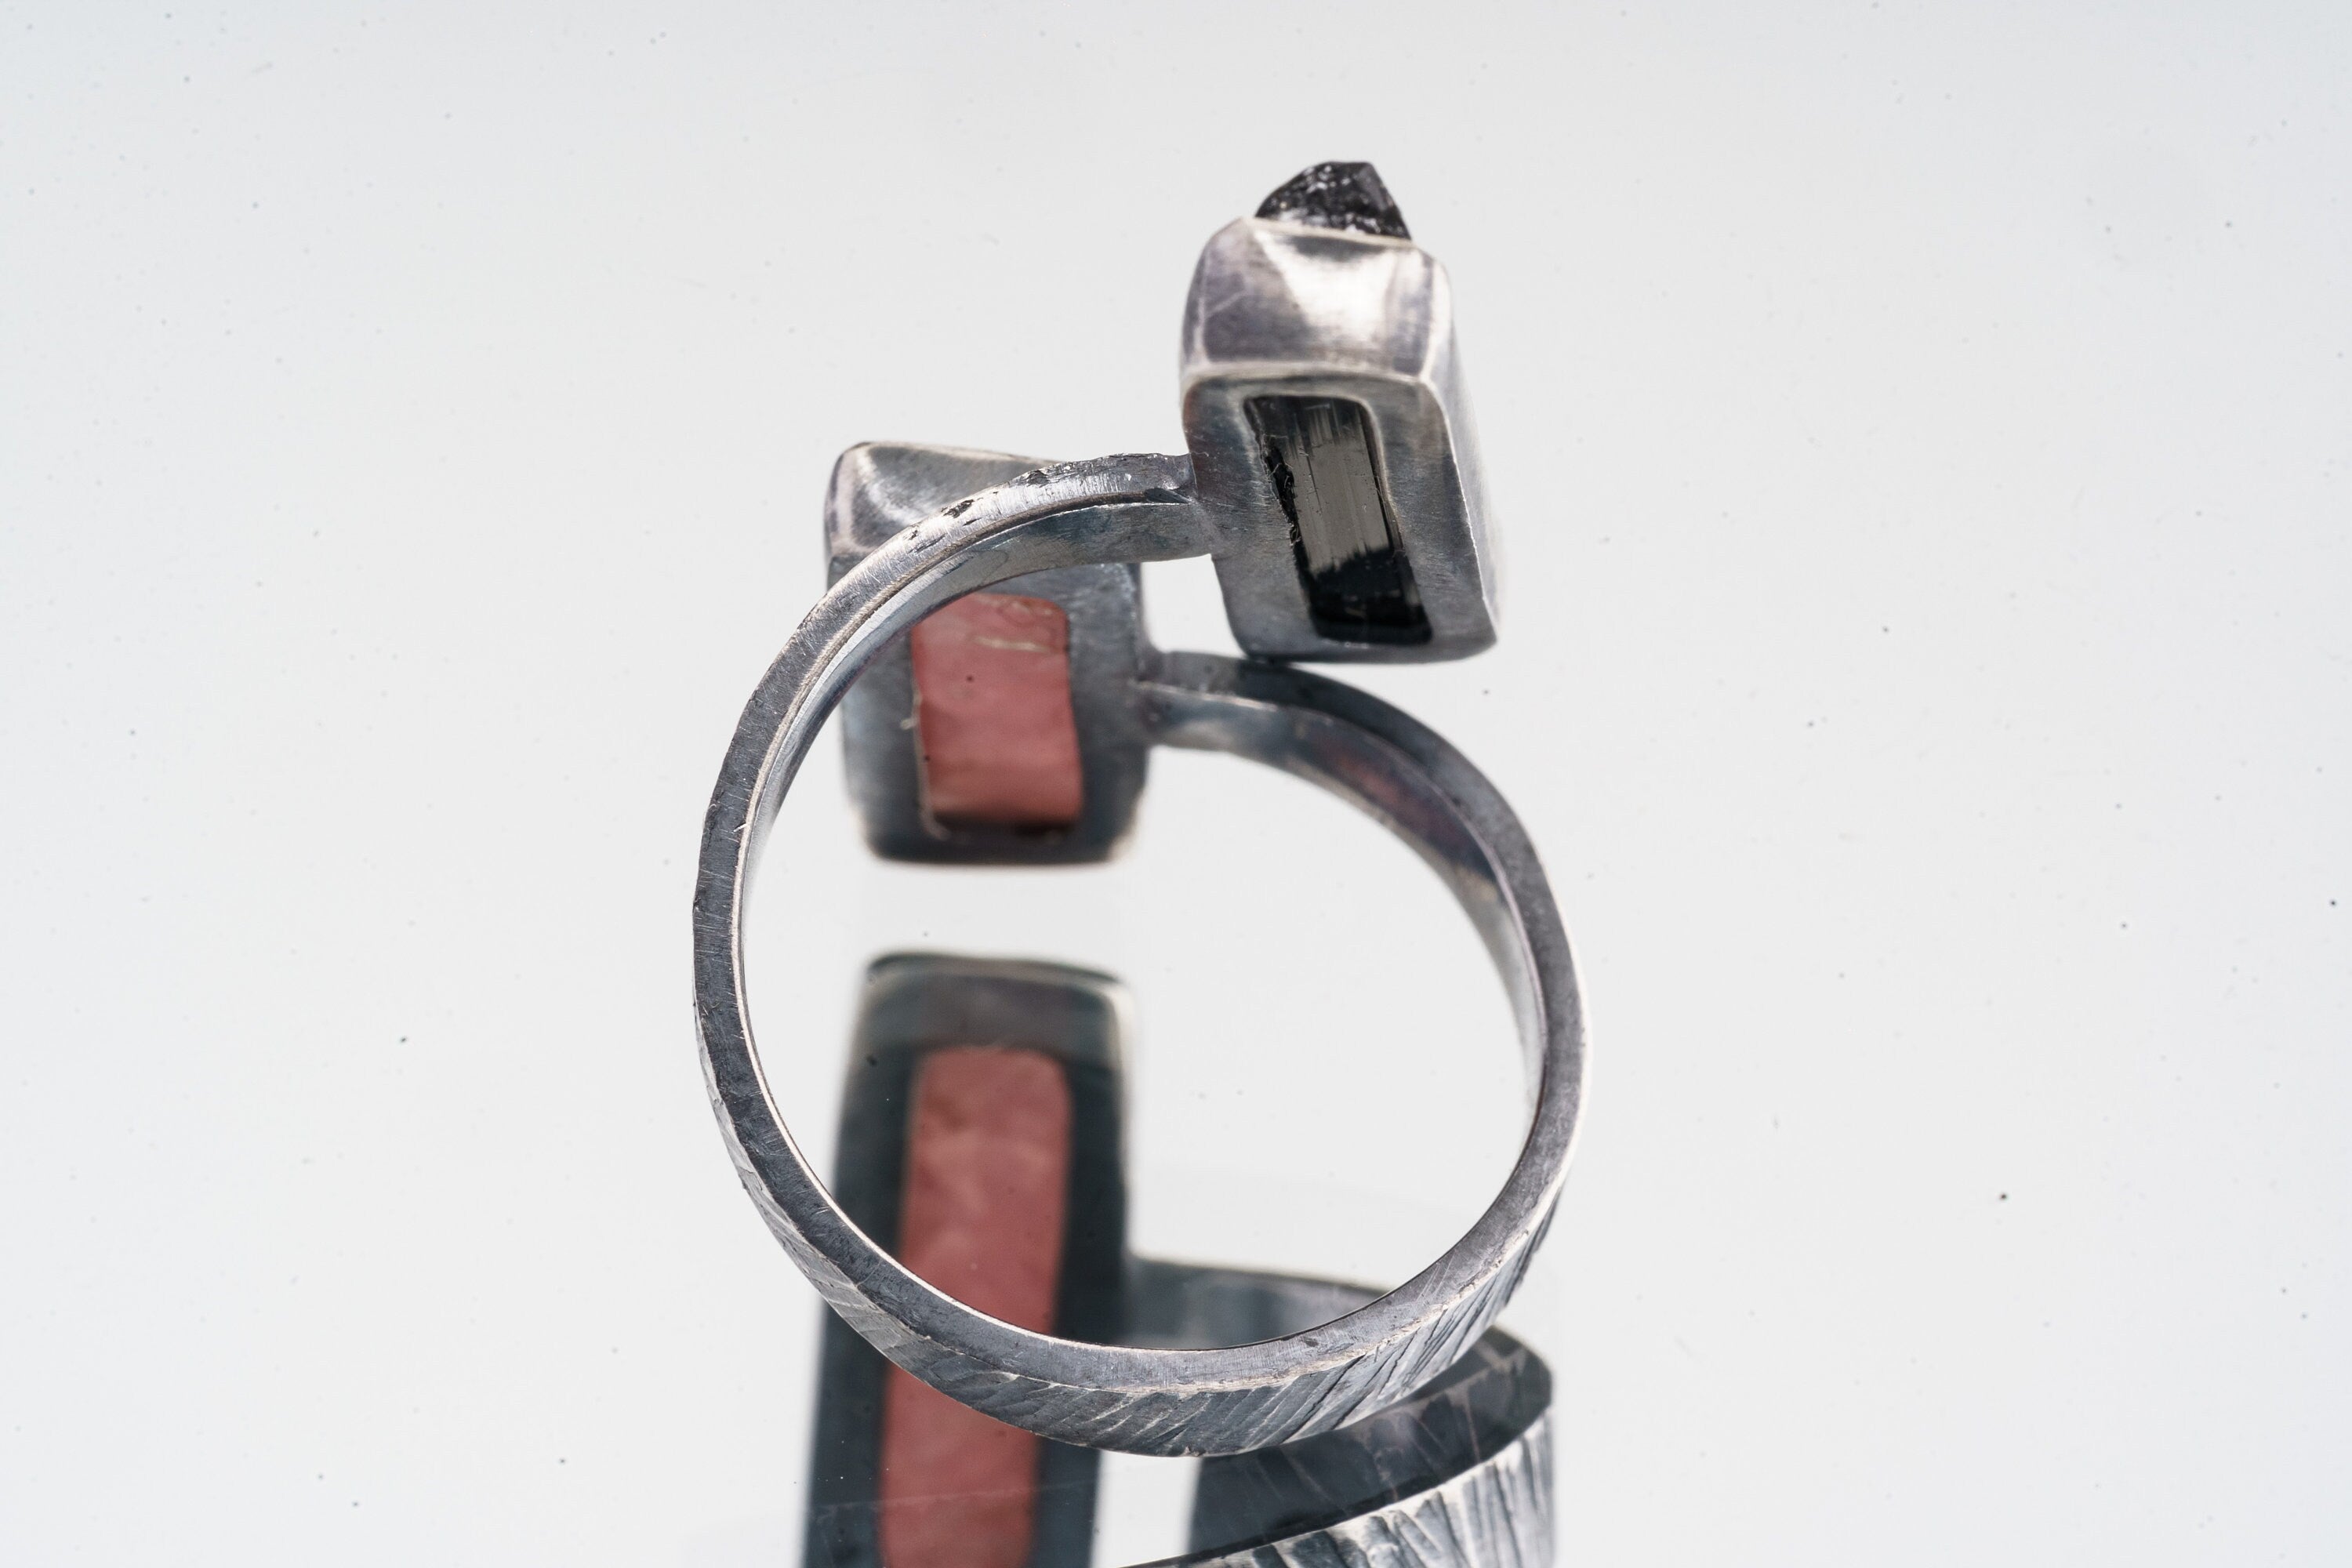 Yin and Yang Harmony - Black Tourmaline and Rhodochrosite - Unisex - Size 4-10 US - Large Adjustable Sterling Silver Ring